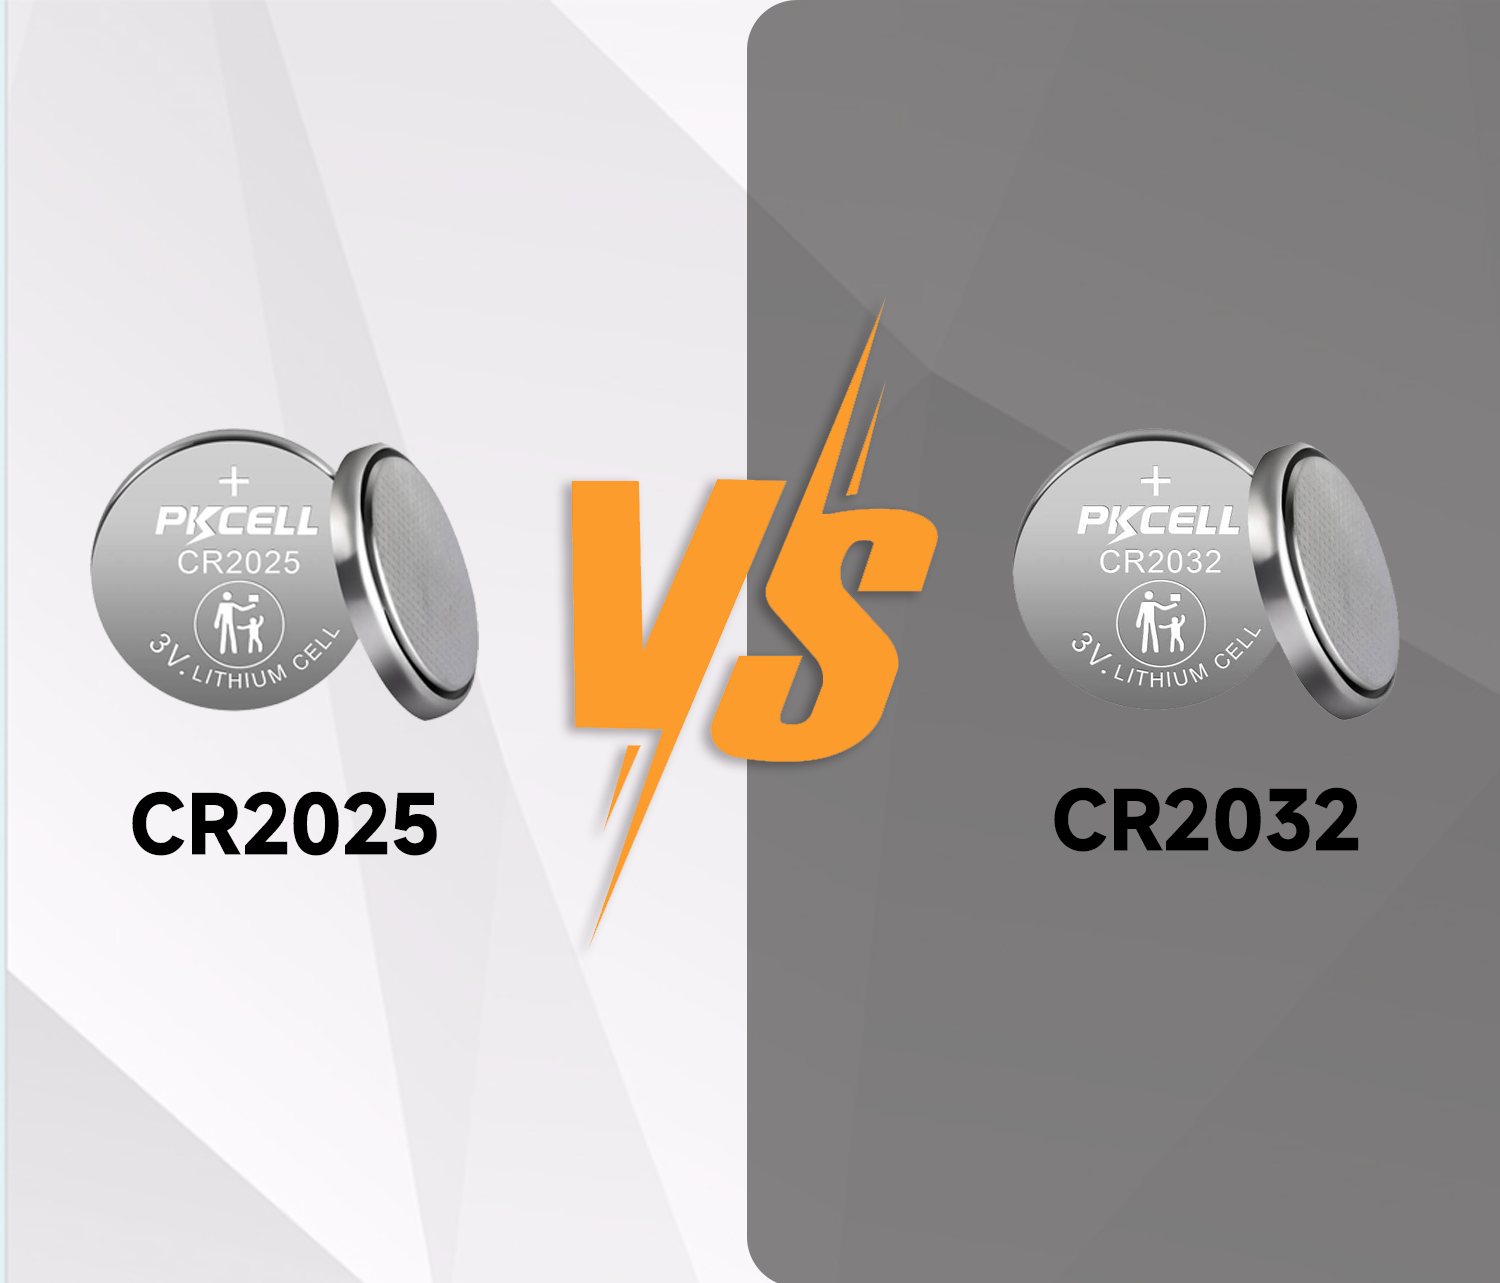 What are the differences between CR2025 and CR 2032 button batteries